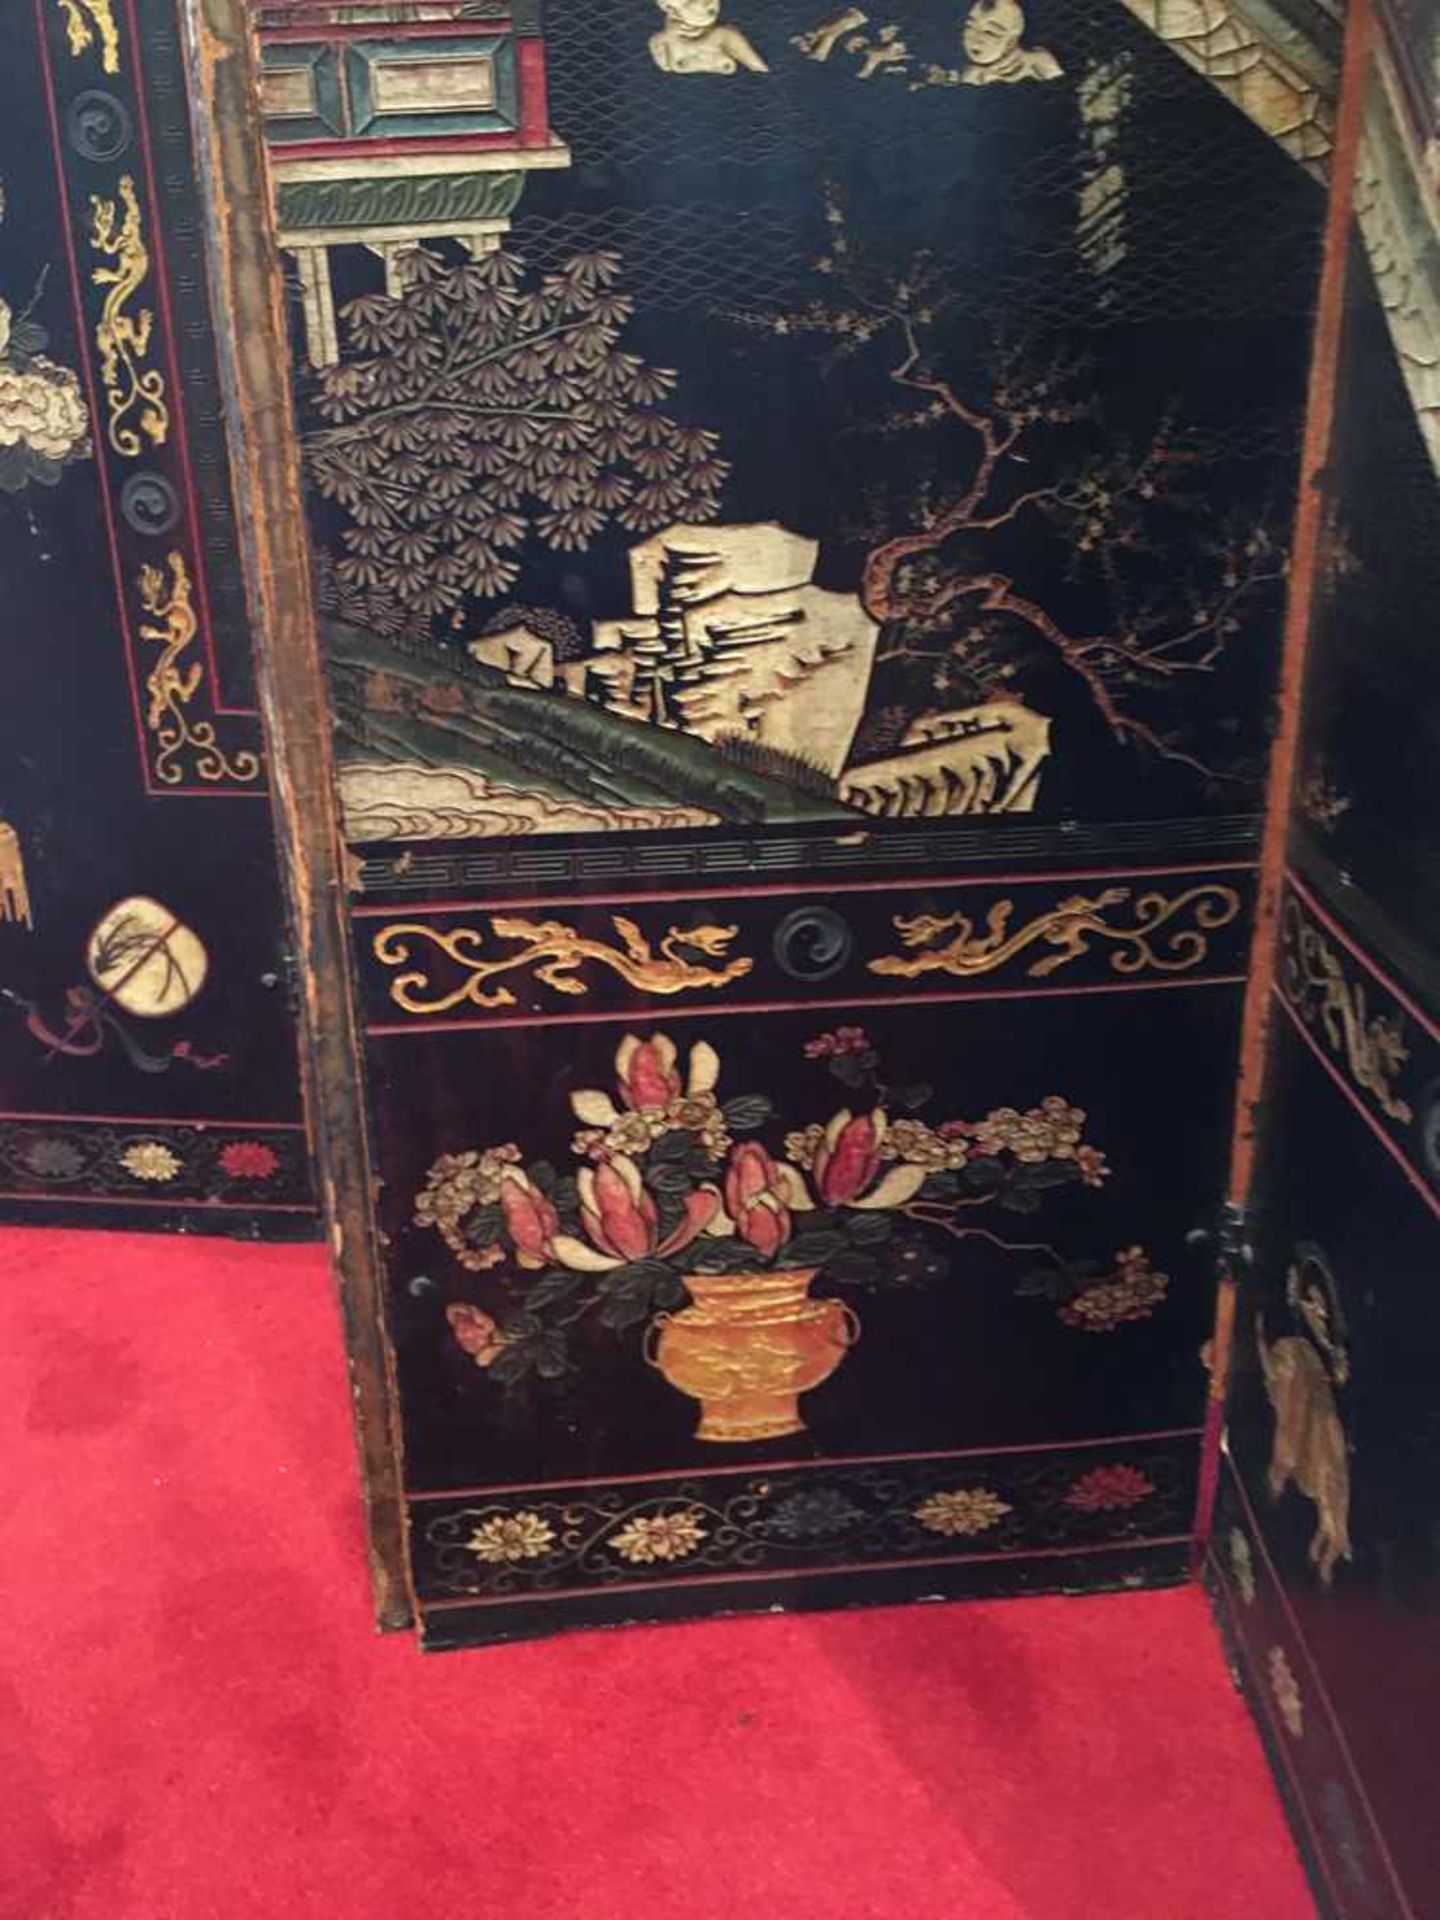 A CHINESE COROMANDEL BLACK LACQUER TWELVE-PANEL SCREEN QING DYNASTY, 18TH CENTURY - Image 16 of 72